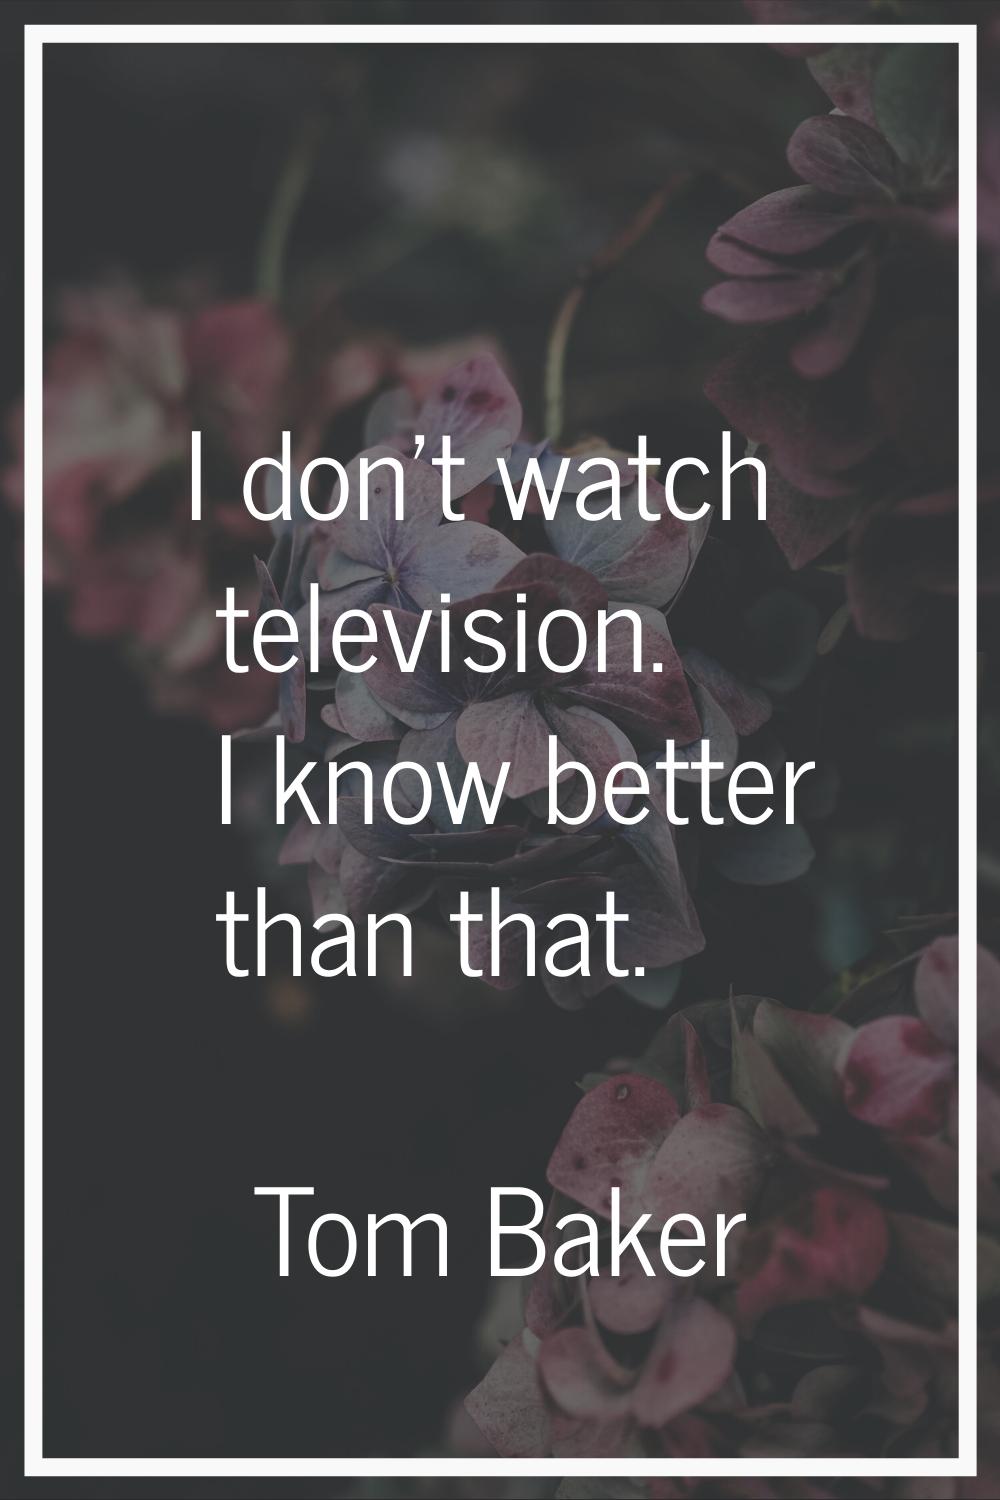 I don't watch television. I know better than that.